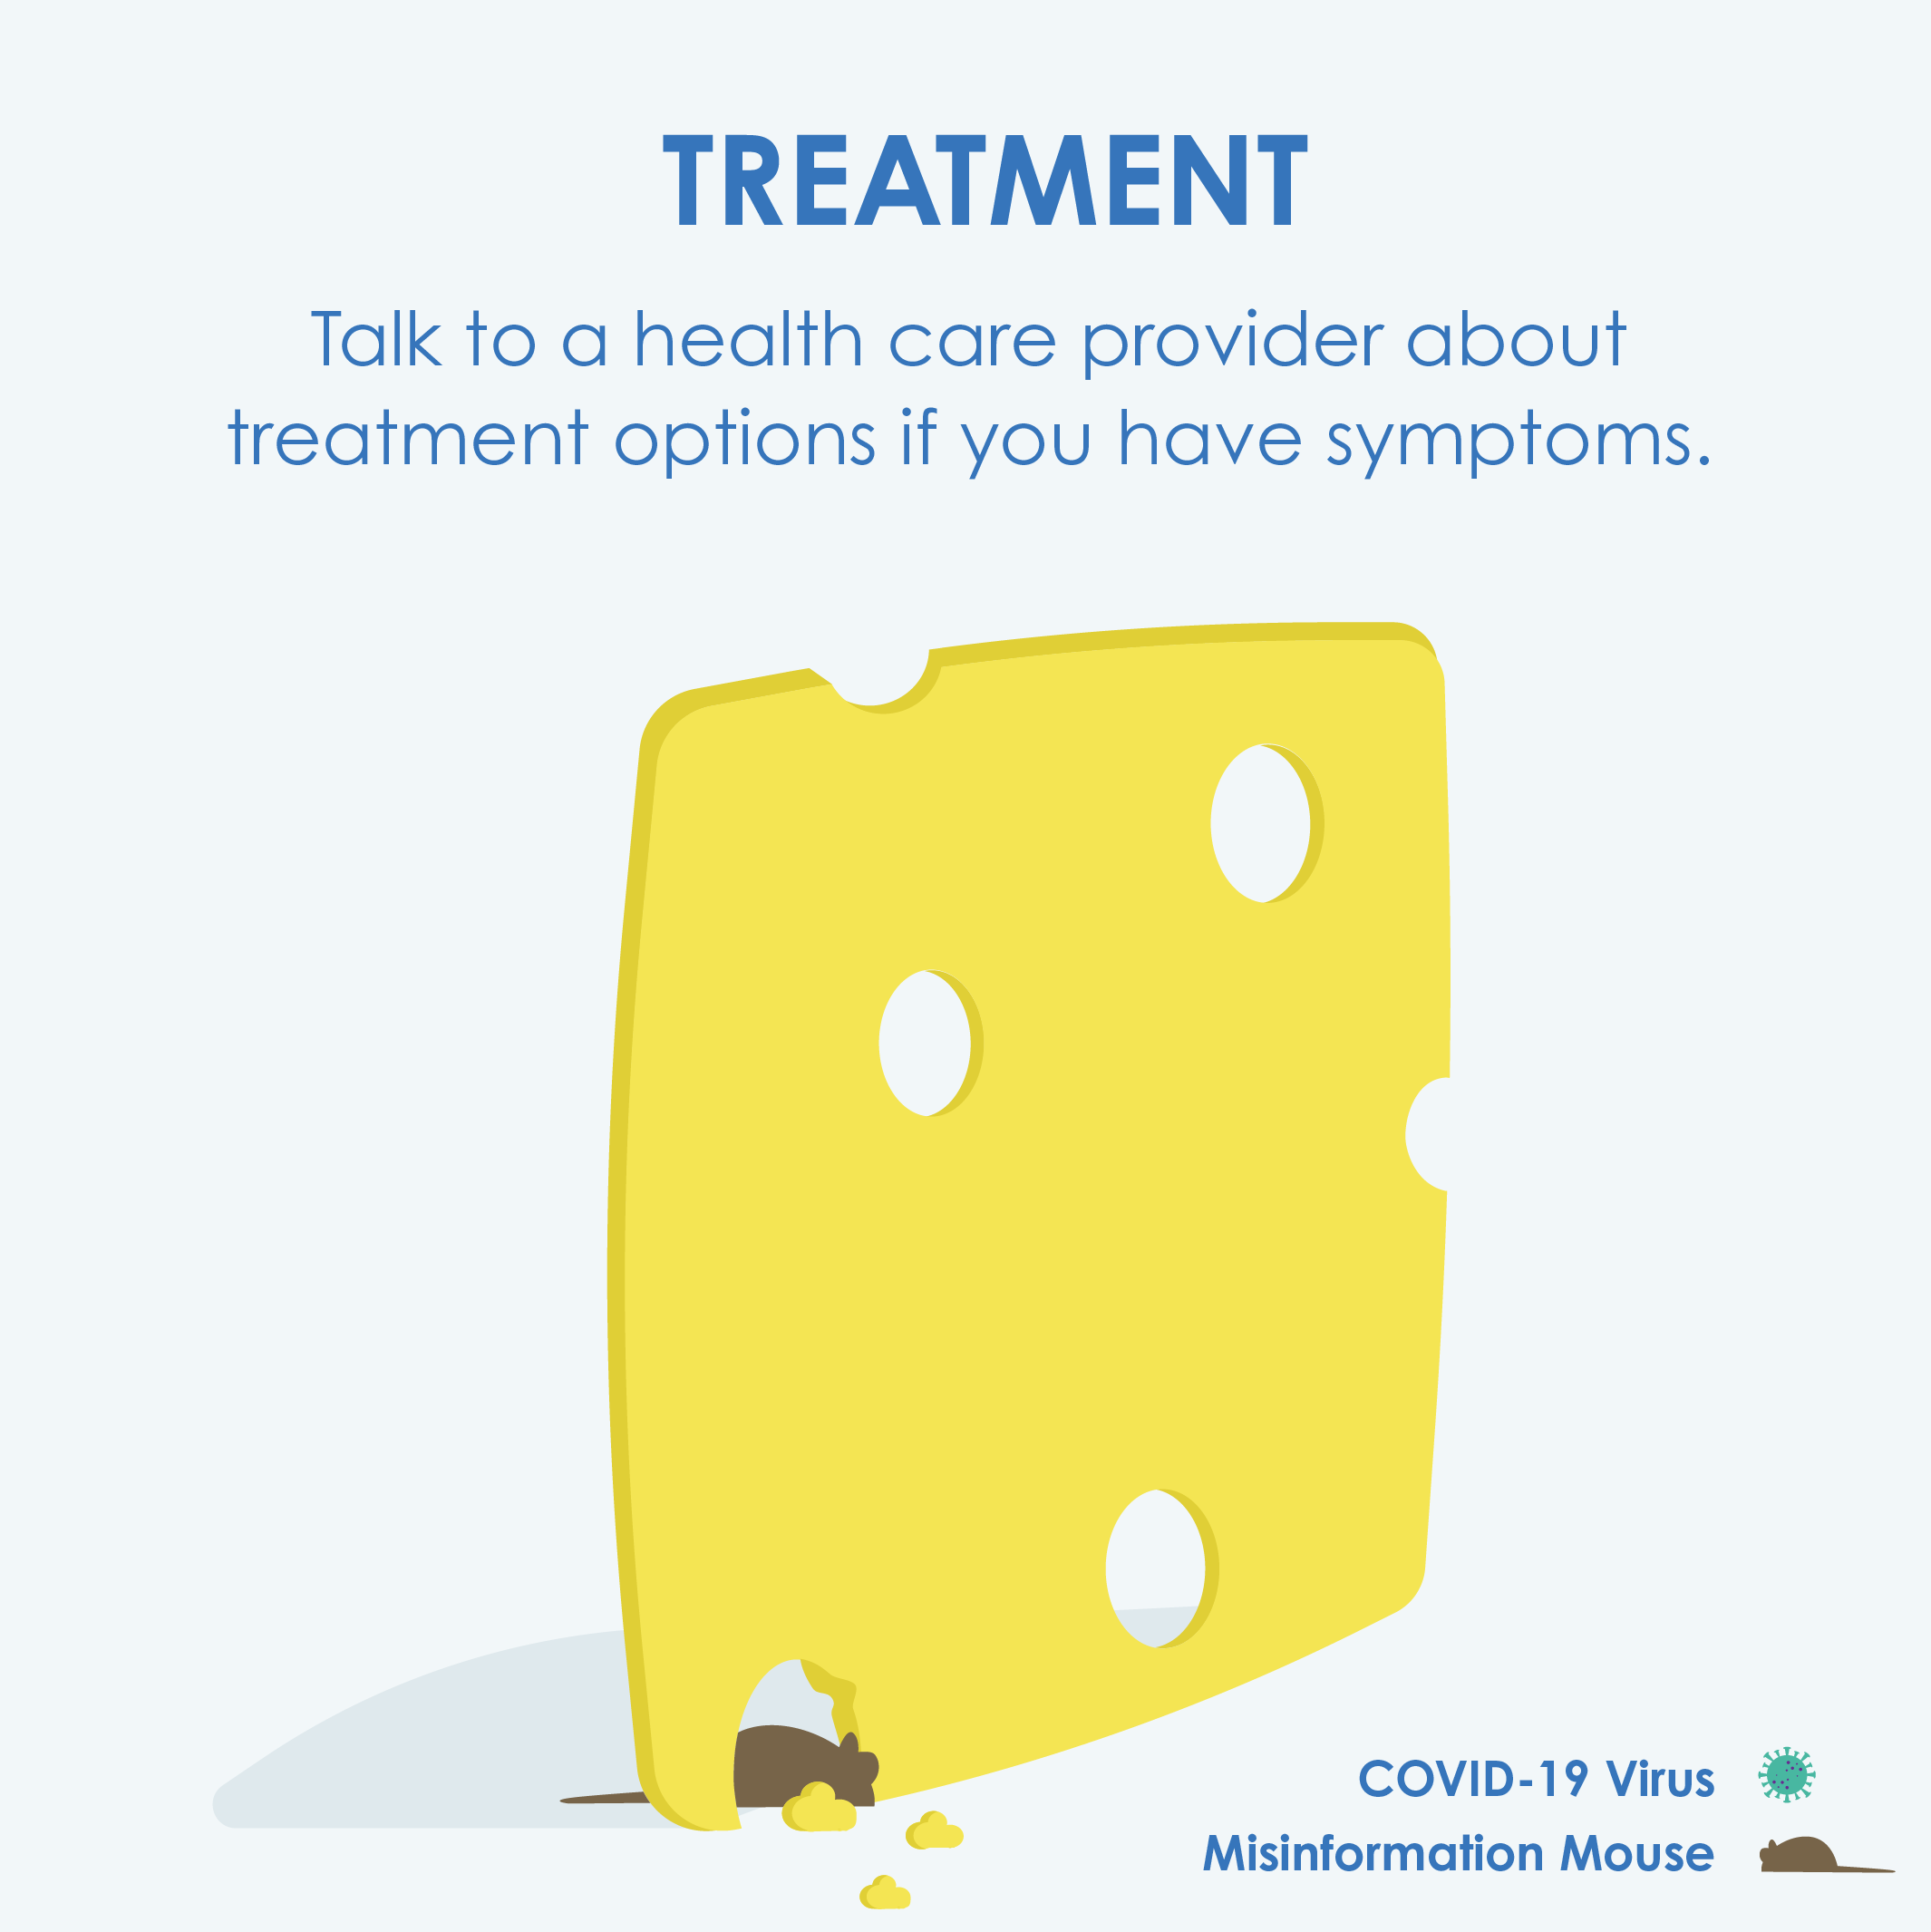 Treatment. Talk to a health care provider about treatment options if you have symptoms.